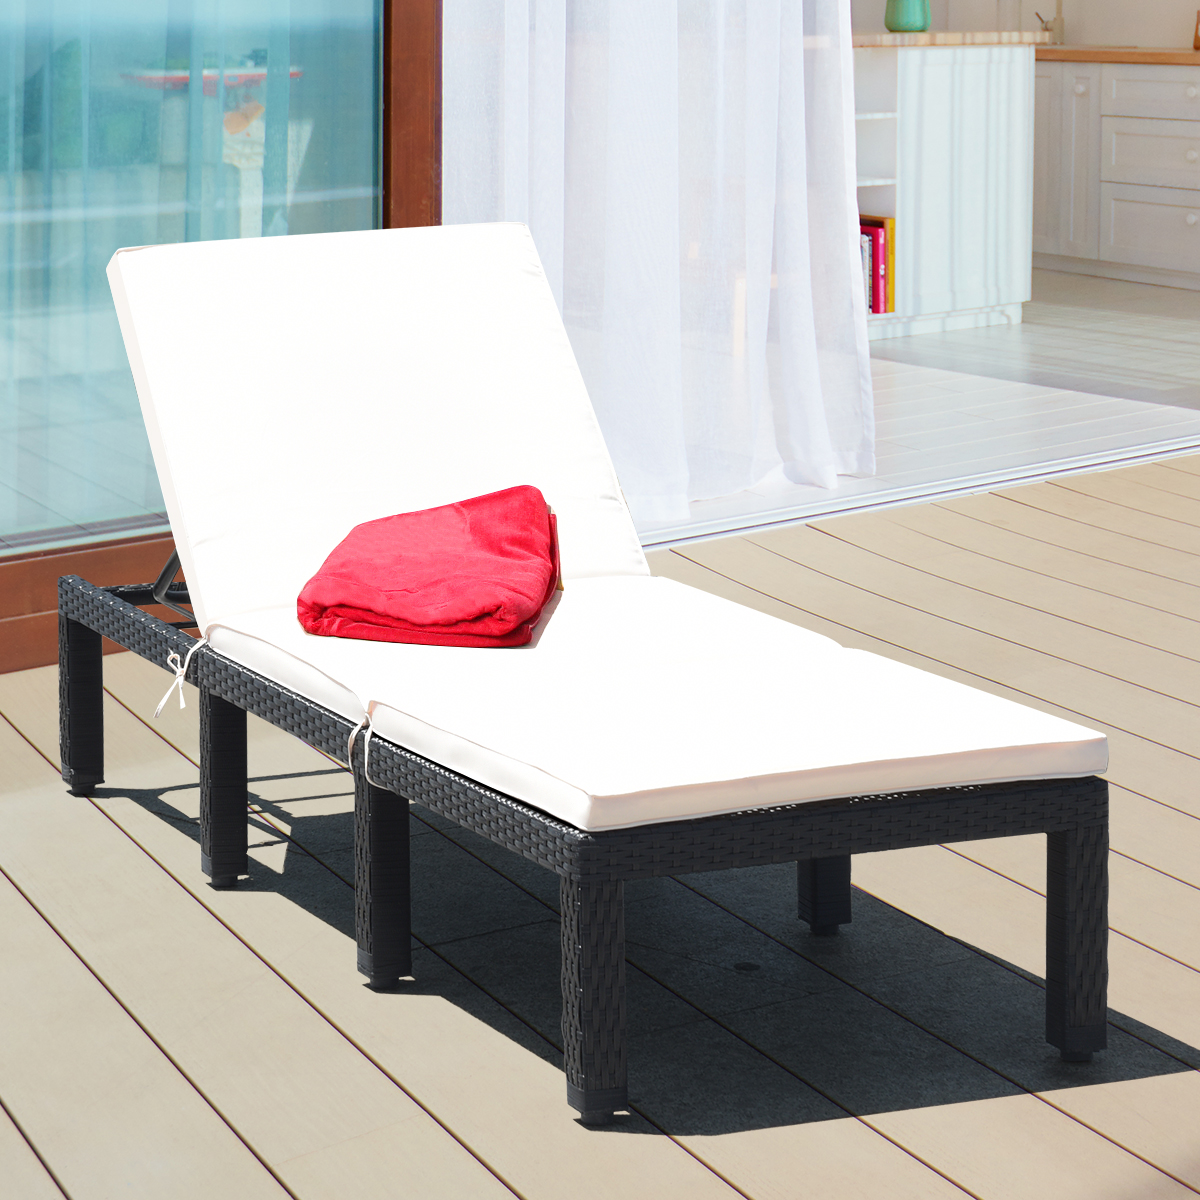 Costway Patio Lounge Chaise Couch Cushioned Rattan Height Adjustable Garden White - image 1 of 9